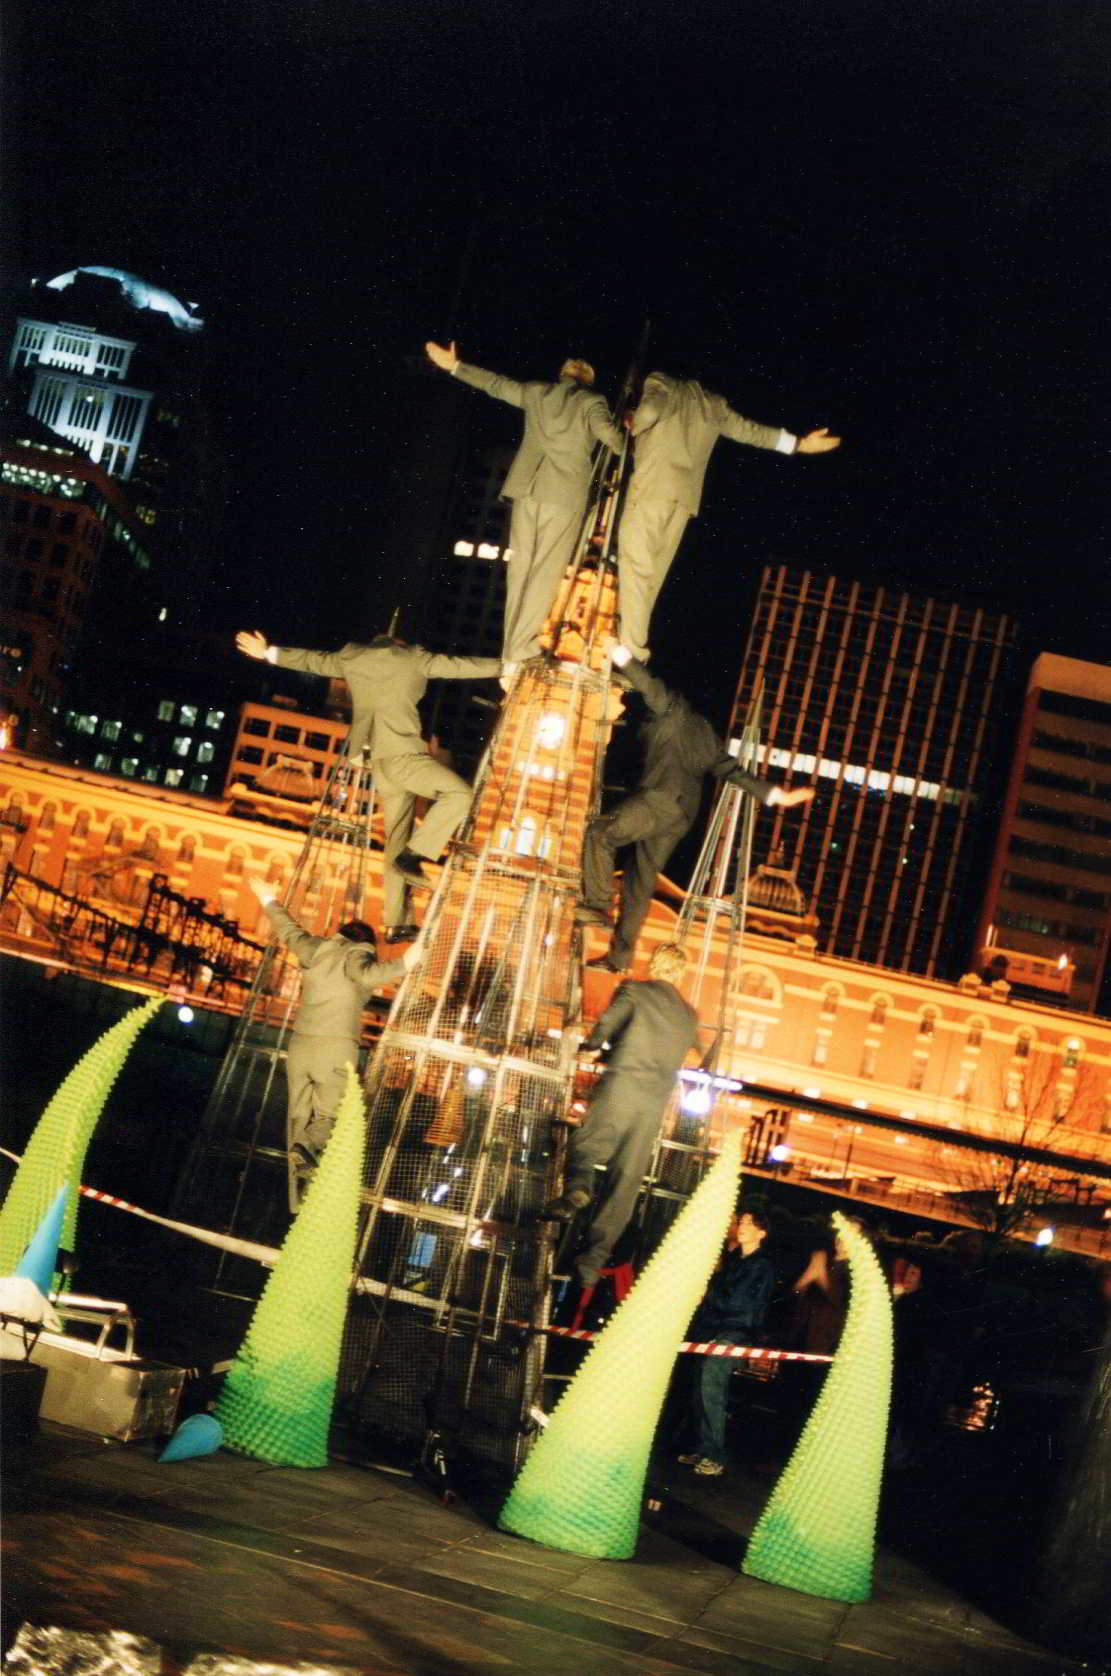 back view of acrobats at night in a 3-high tower in front of city buildings